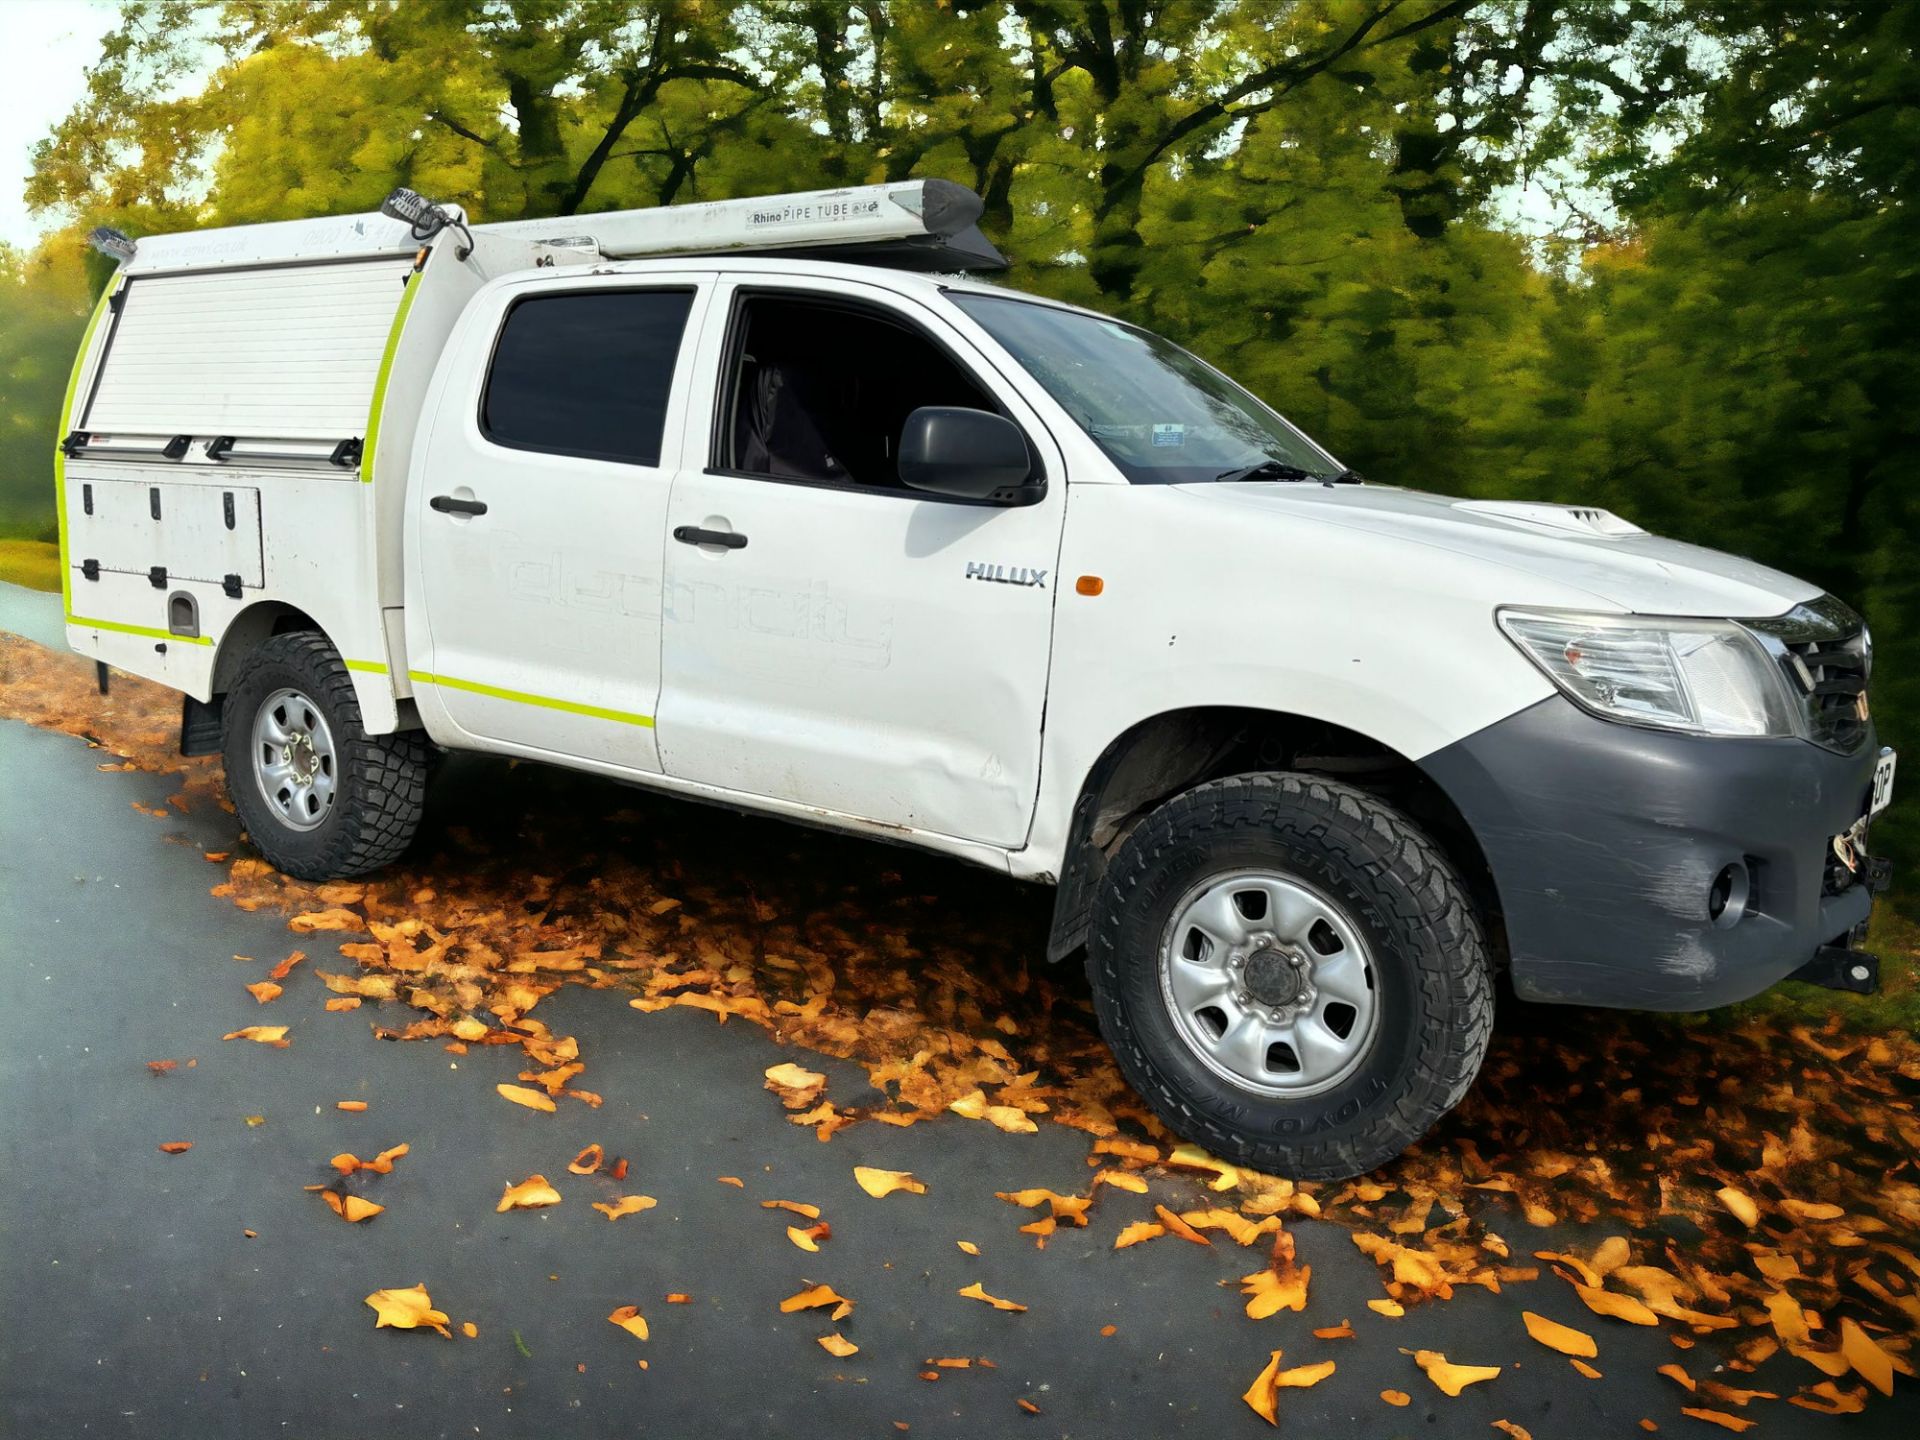 EXCEPTIONAL TOYOTA HILUX DOUBLE CAB PICKUP TRUCK WITH PREMIUM FEATURES!